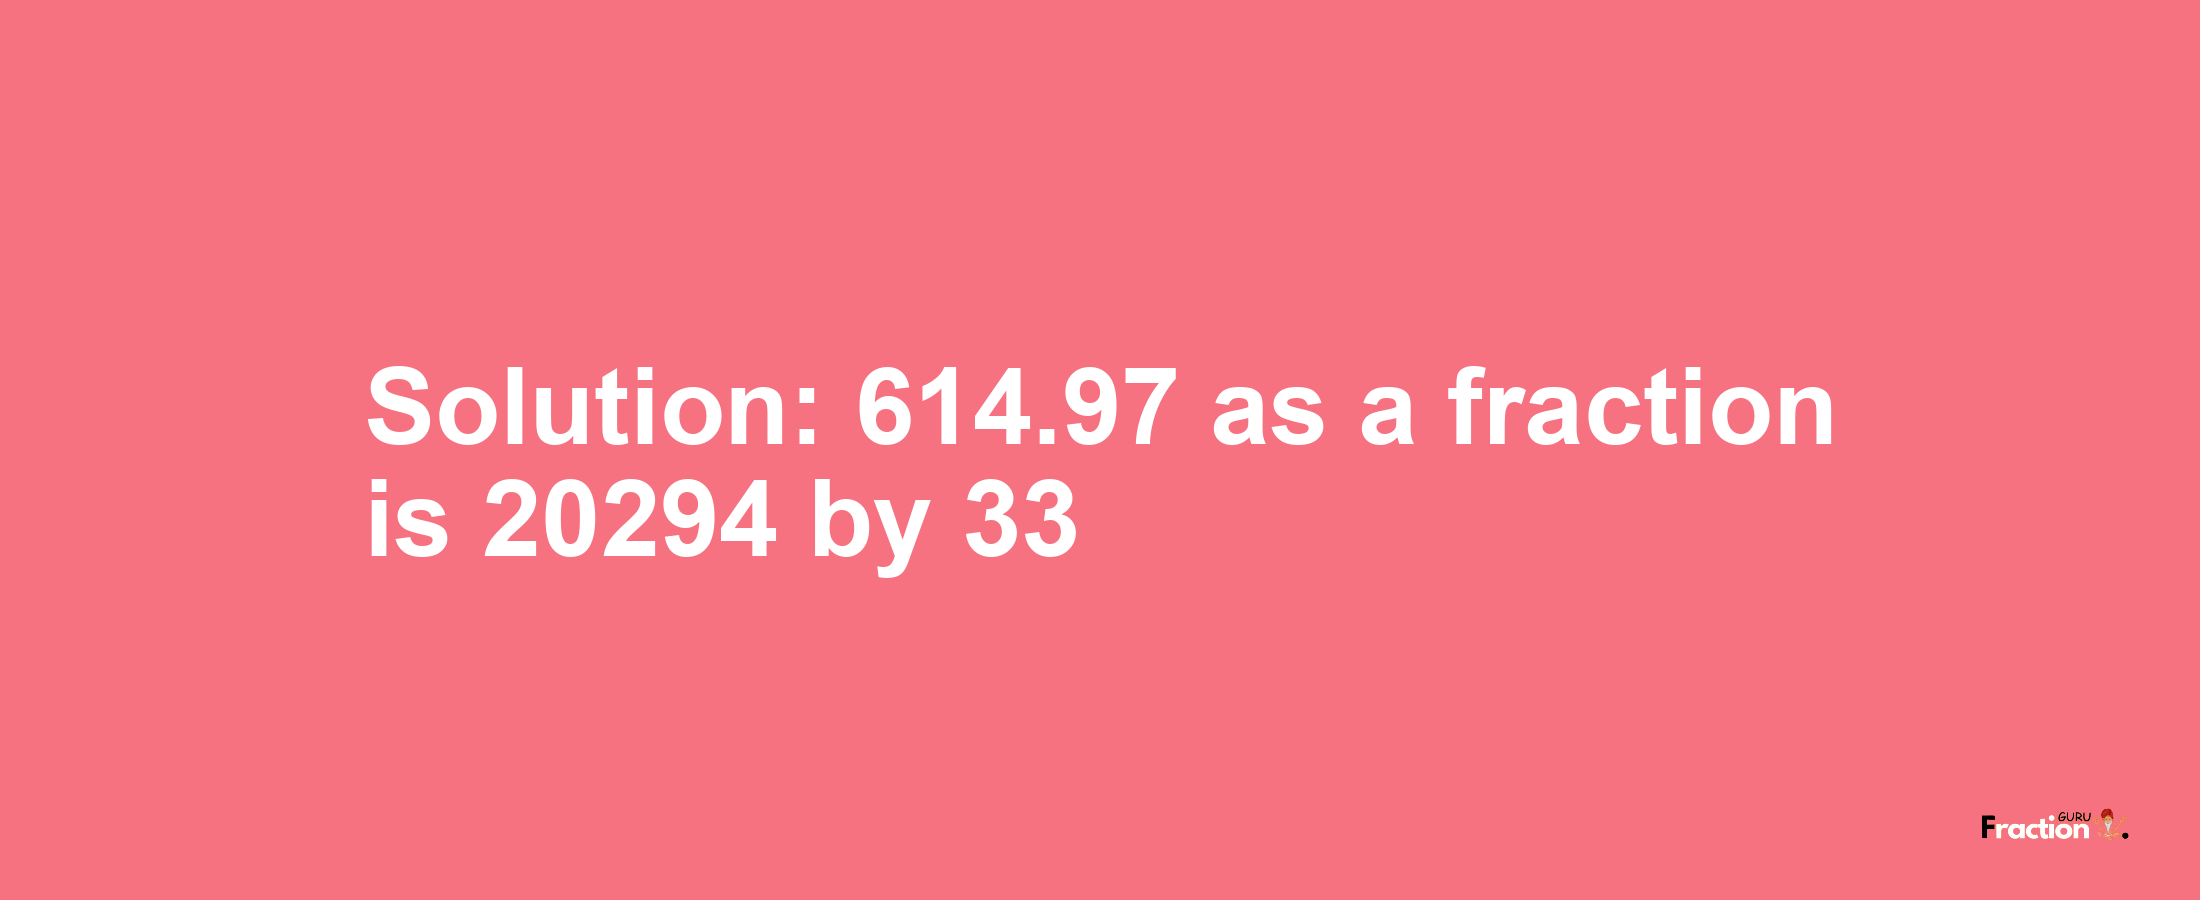 Solution:614.97 as a fraction is 20294/33